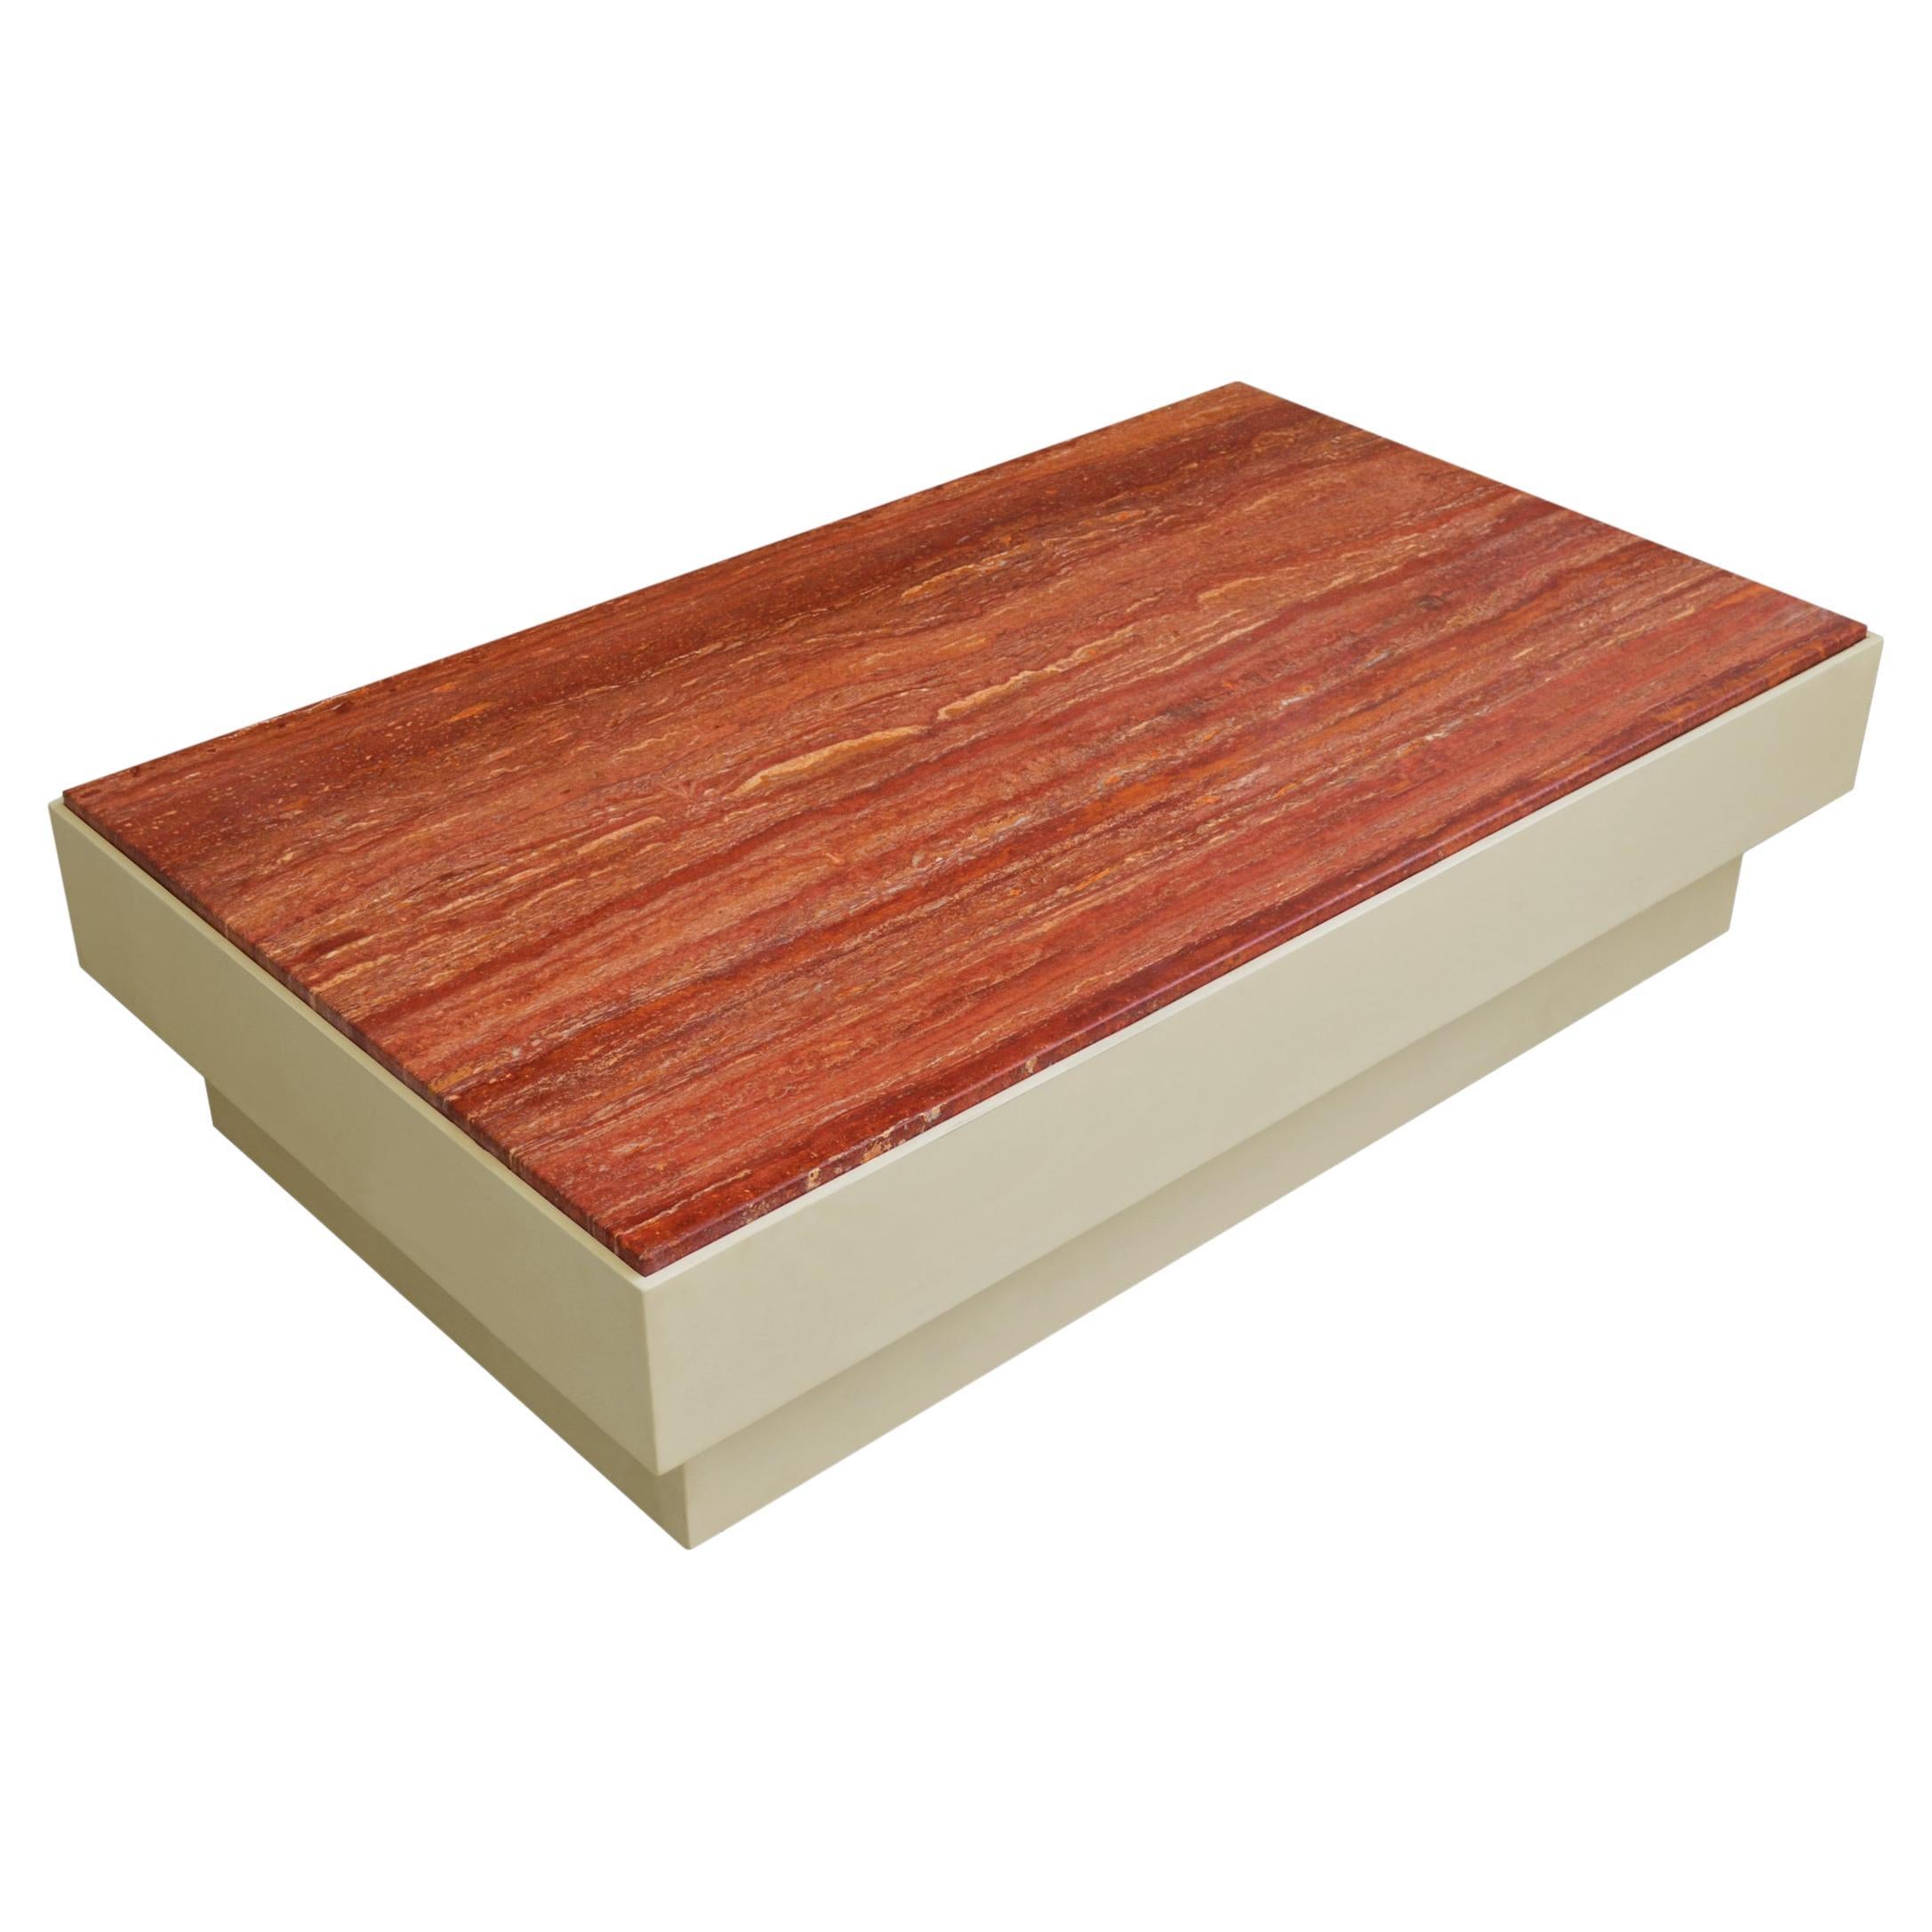 Coffee table red travertine and ivory wooden base handmade in Italy by Cupioli For Sale